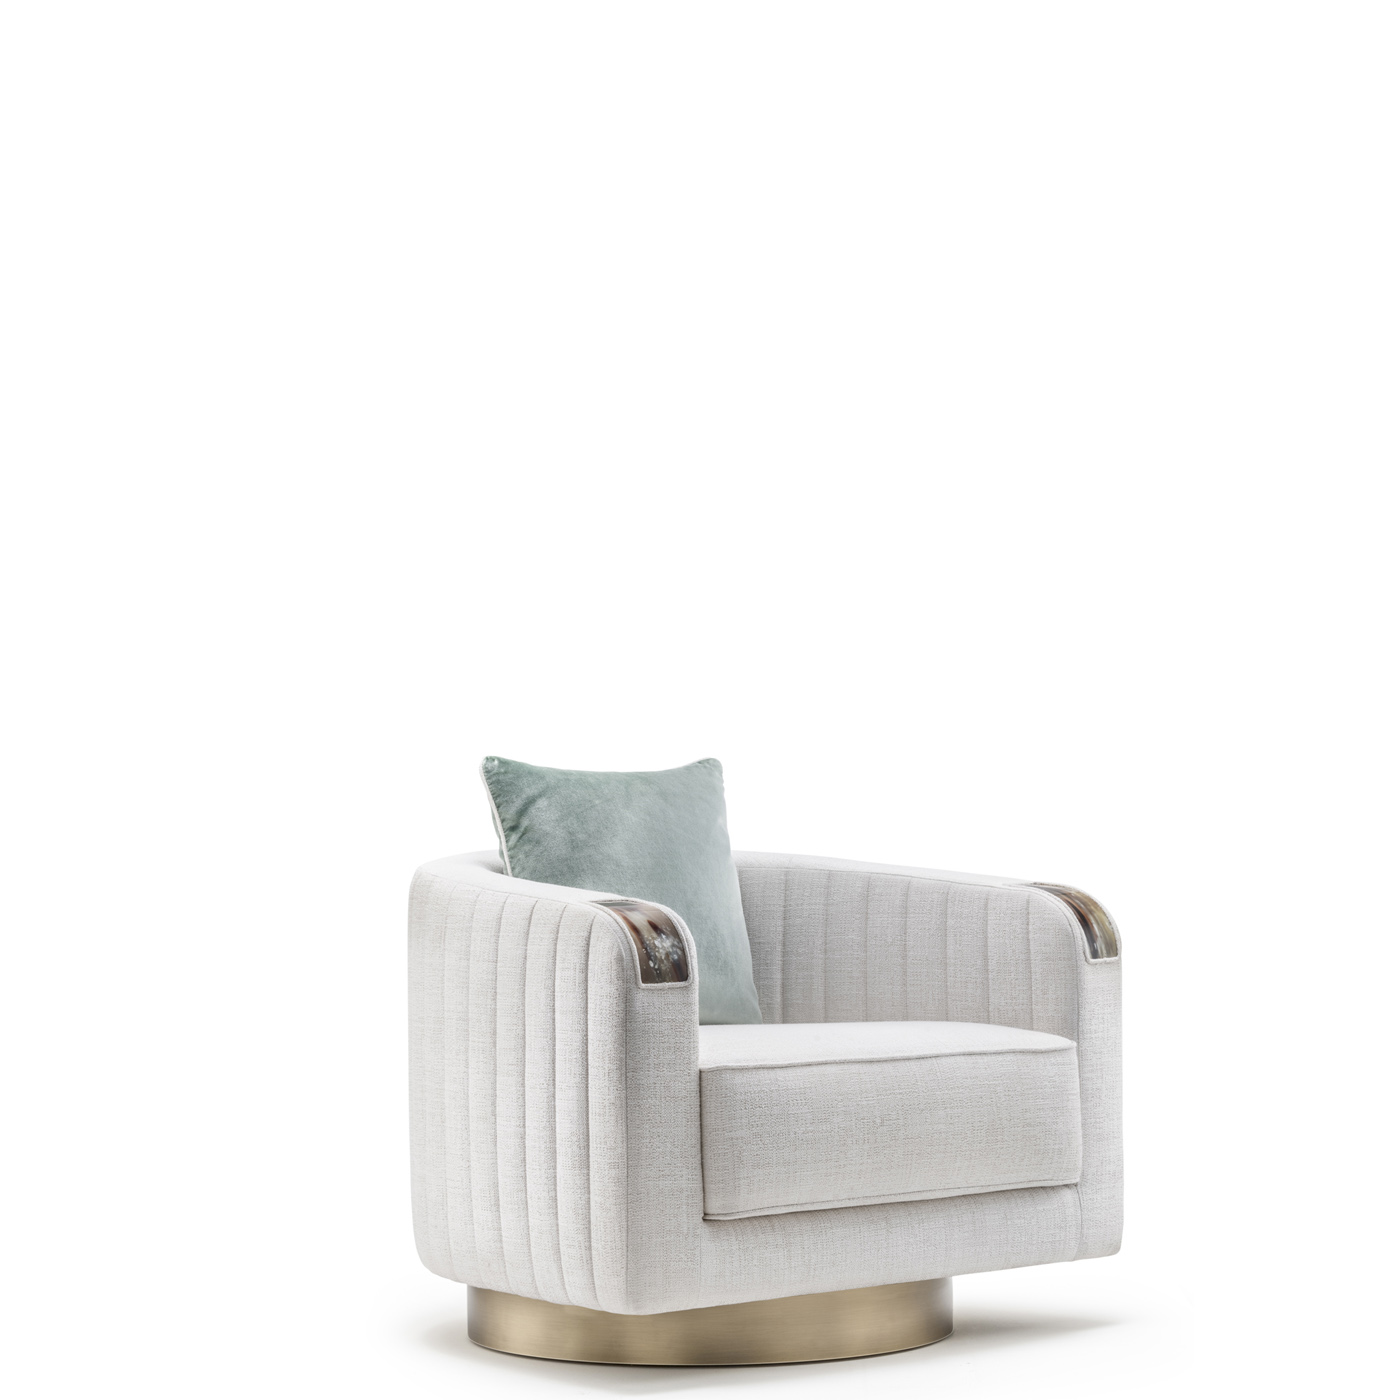 Sofas and seats - Rea armchair in Sparks fabric with horn armrests mod. 7024B - Arcahorn